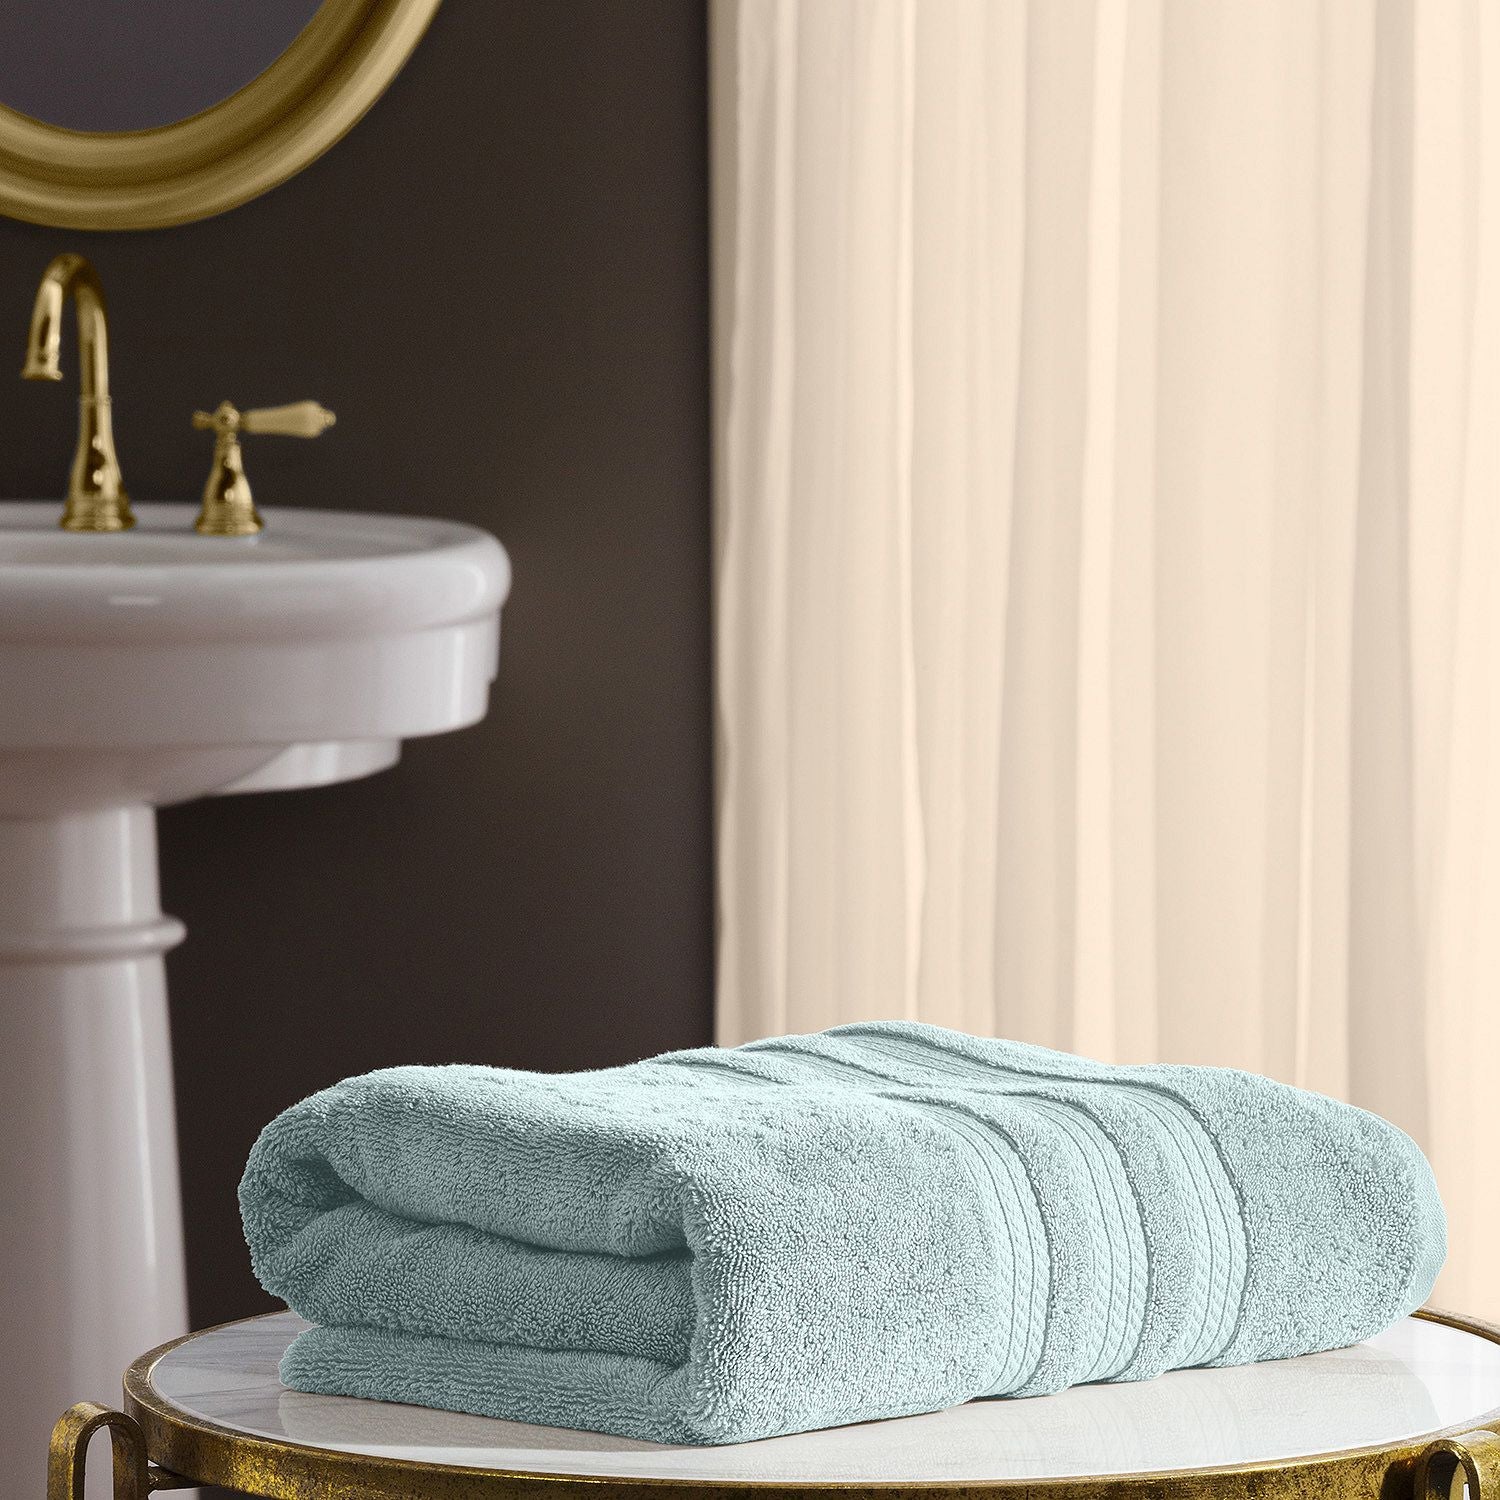  Thick Luxury Bath Towels - 30” x 60”, Heavy Weight, LargeBath  Towels, 100% Combed Cotton, Ultra Soft & Highly Absorbent, 800 GSM